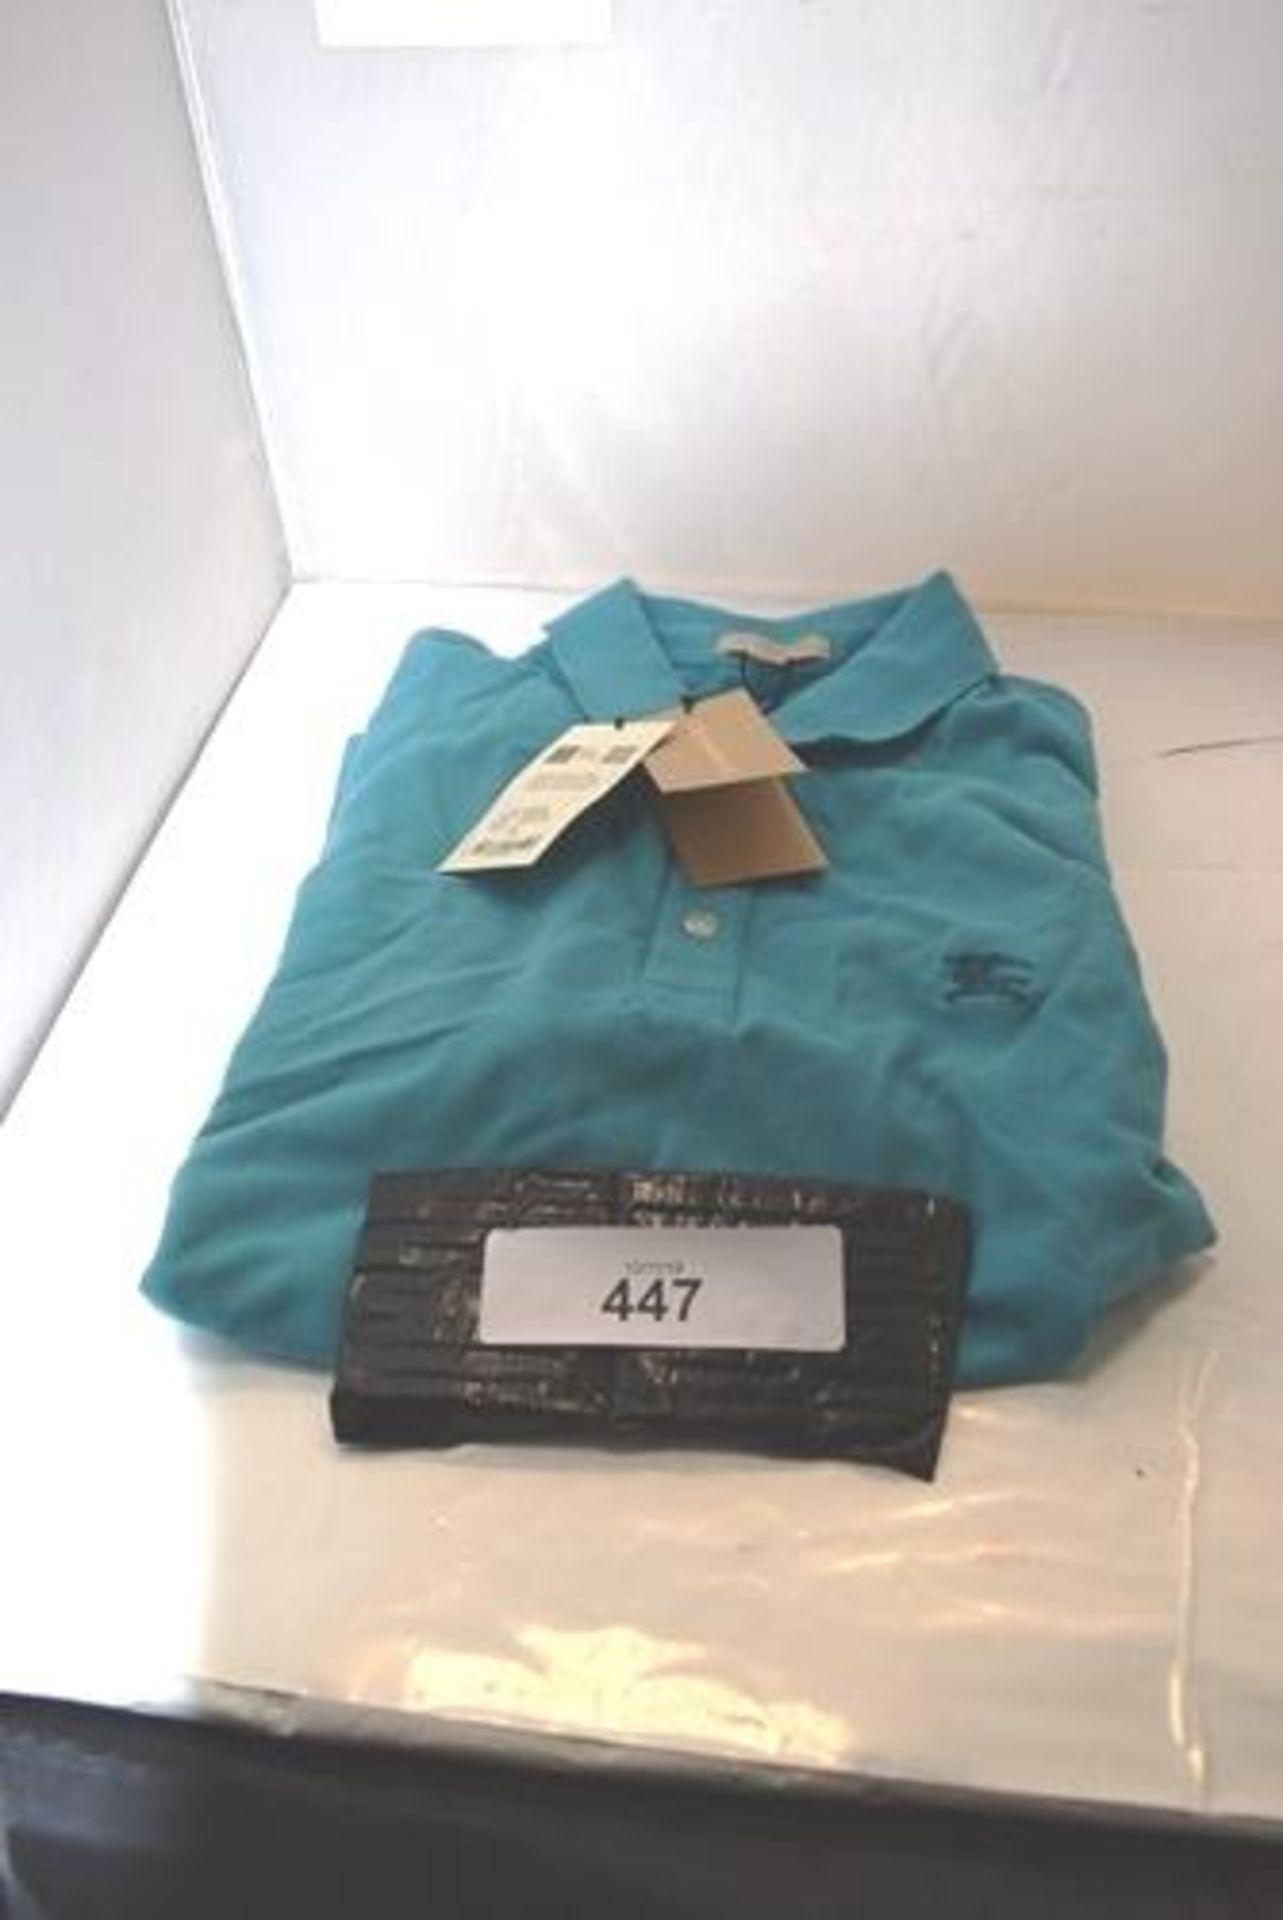 1 x Burberry Wheeler turquoise polo shirt, size small, RRP £175.00 - New (C14C)